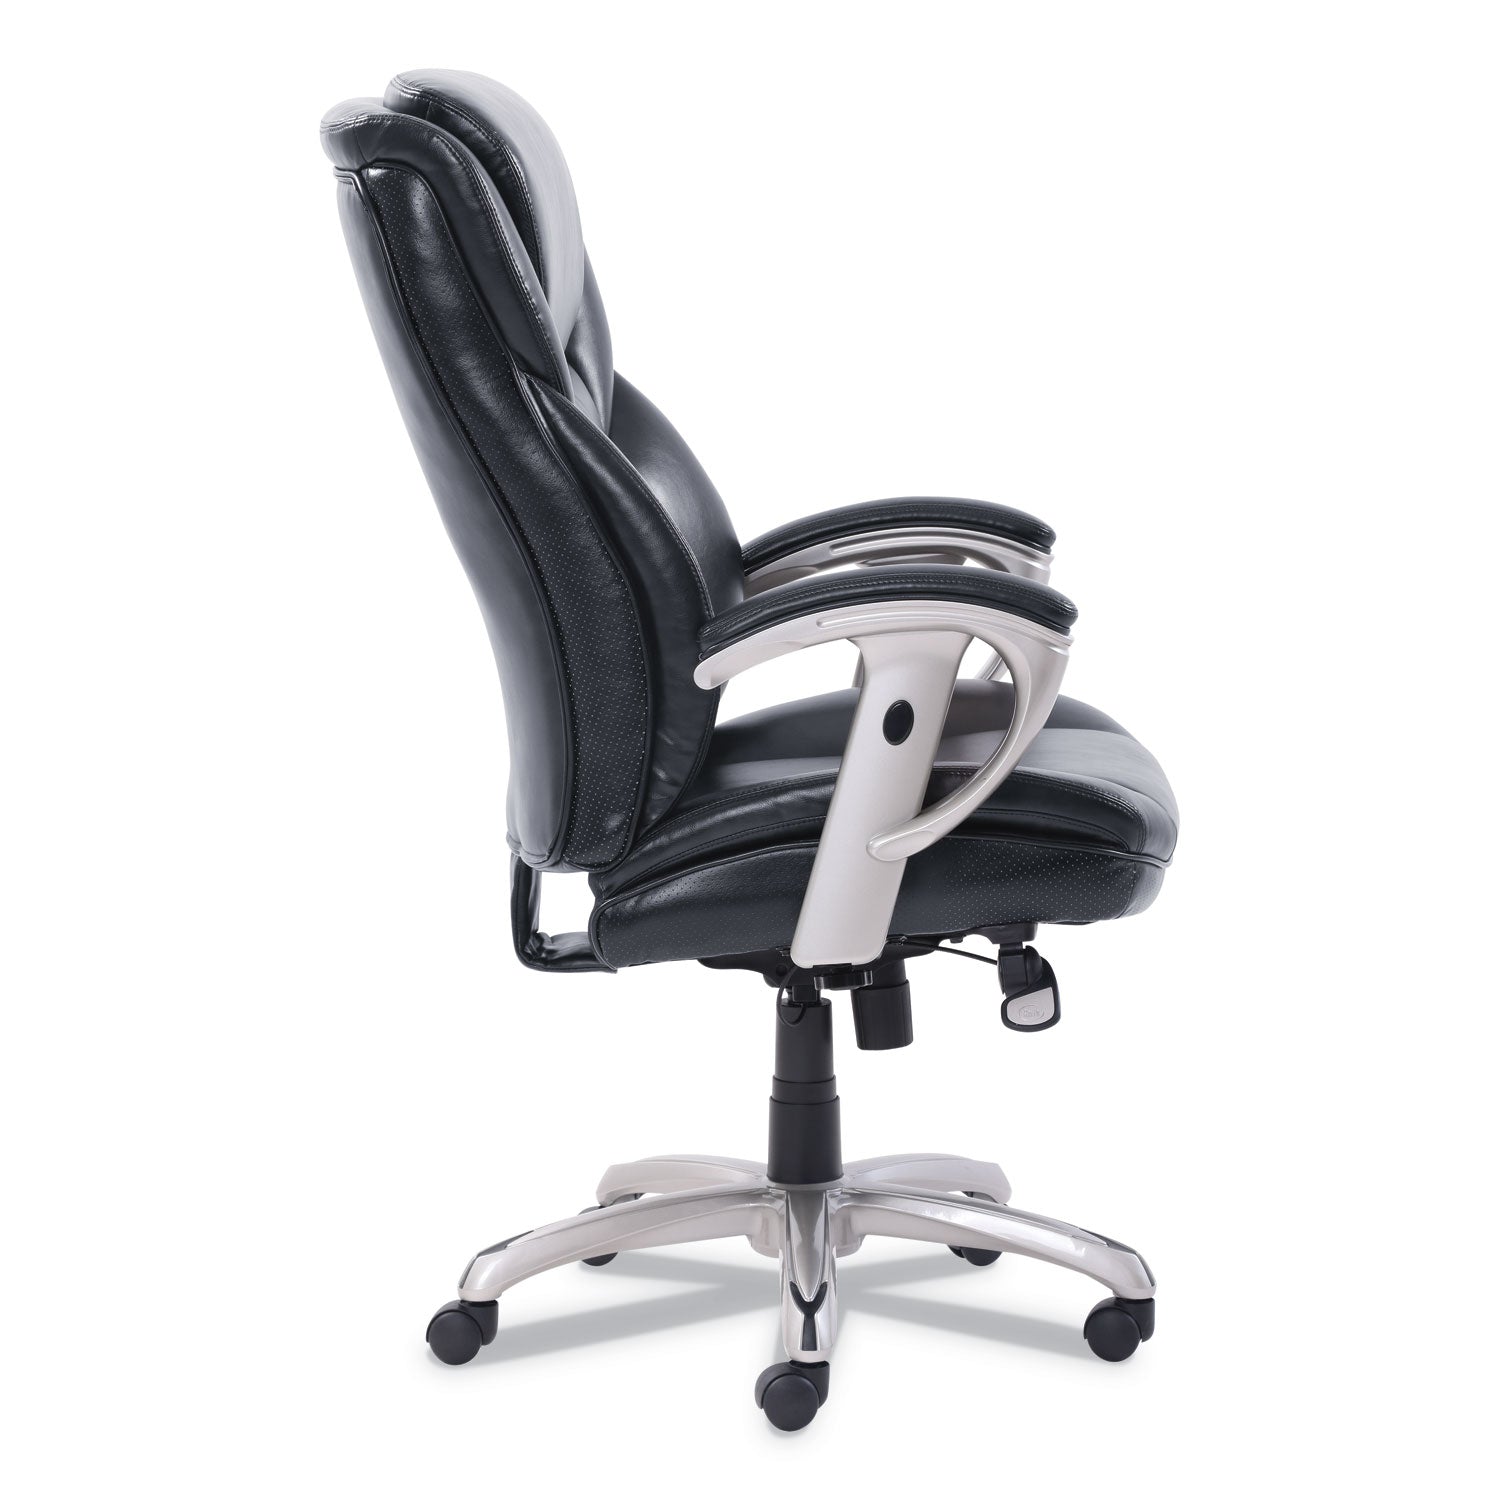 emerson-executive-task-chair-supports-up-to-300-lb-19-to-22-seat-height-black-seat-back-silver-base_srj49710blk - 3